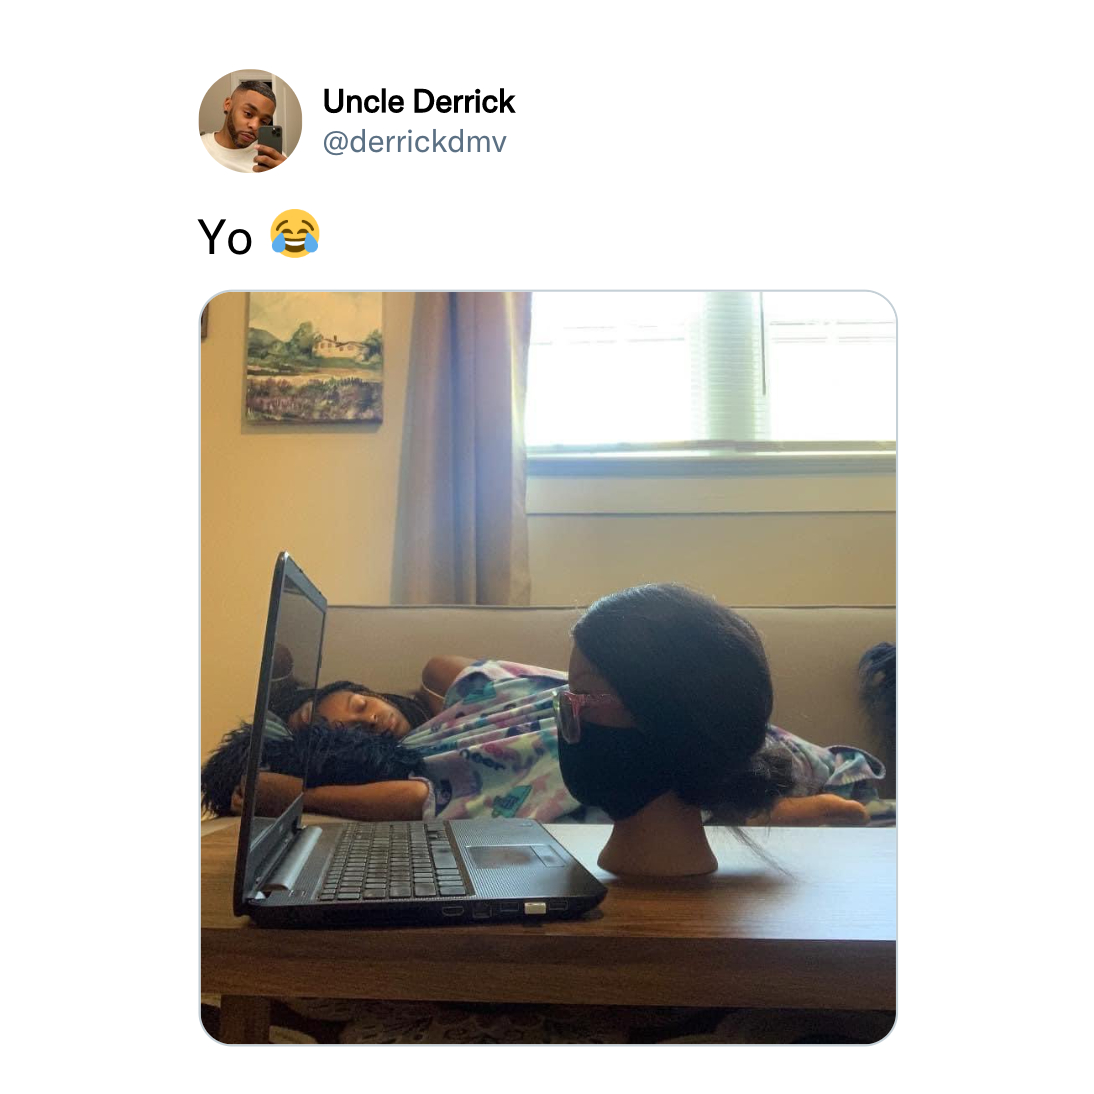 funny memes and tweets - sitting - Uncle Derrick Yo